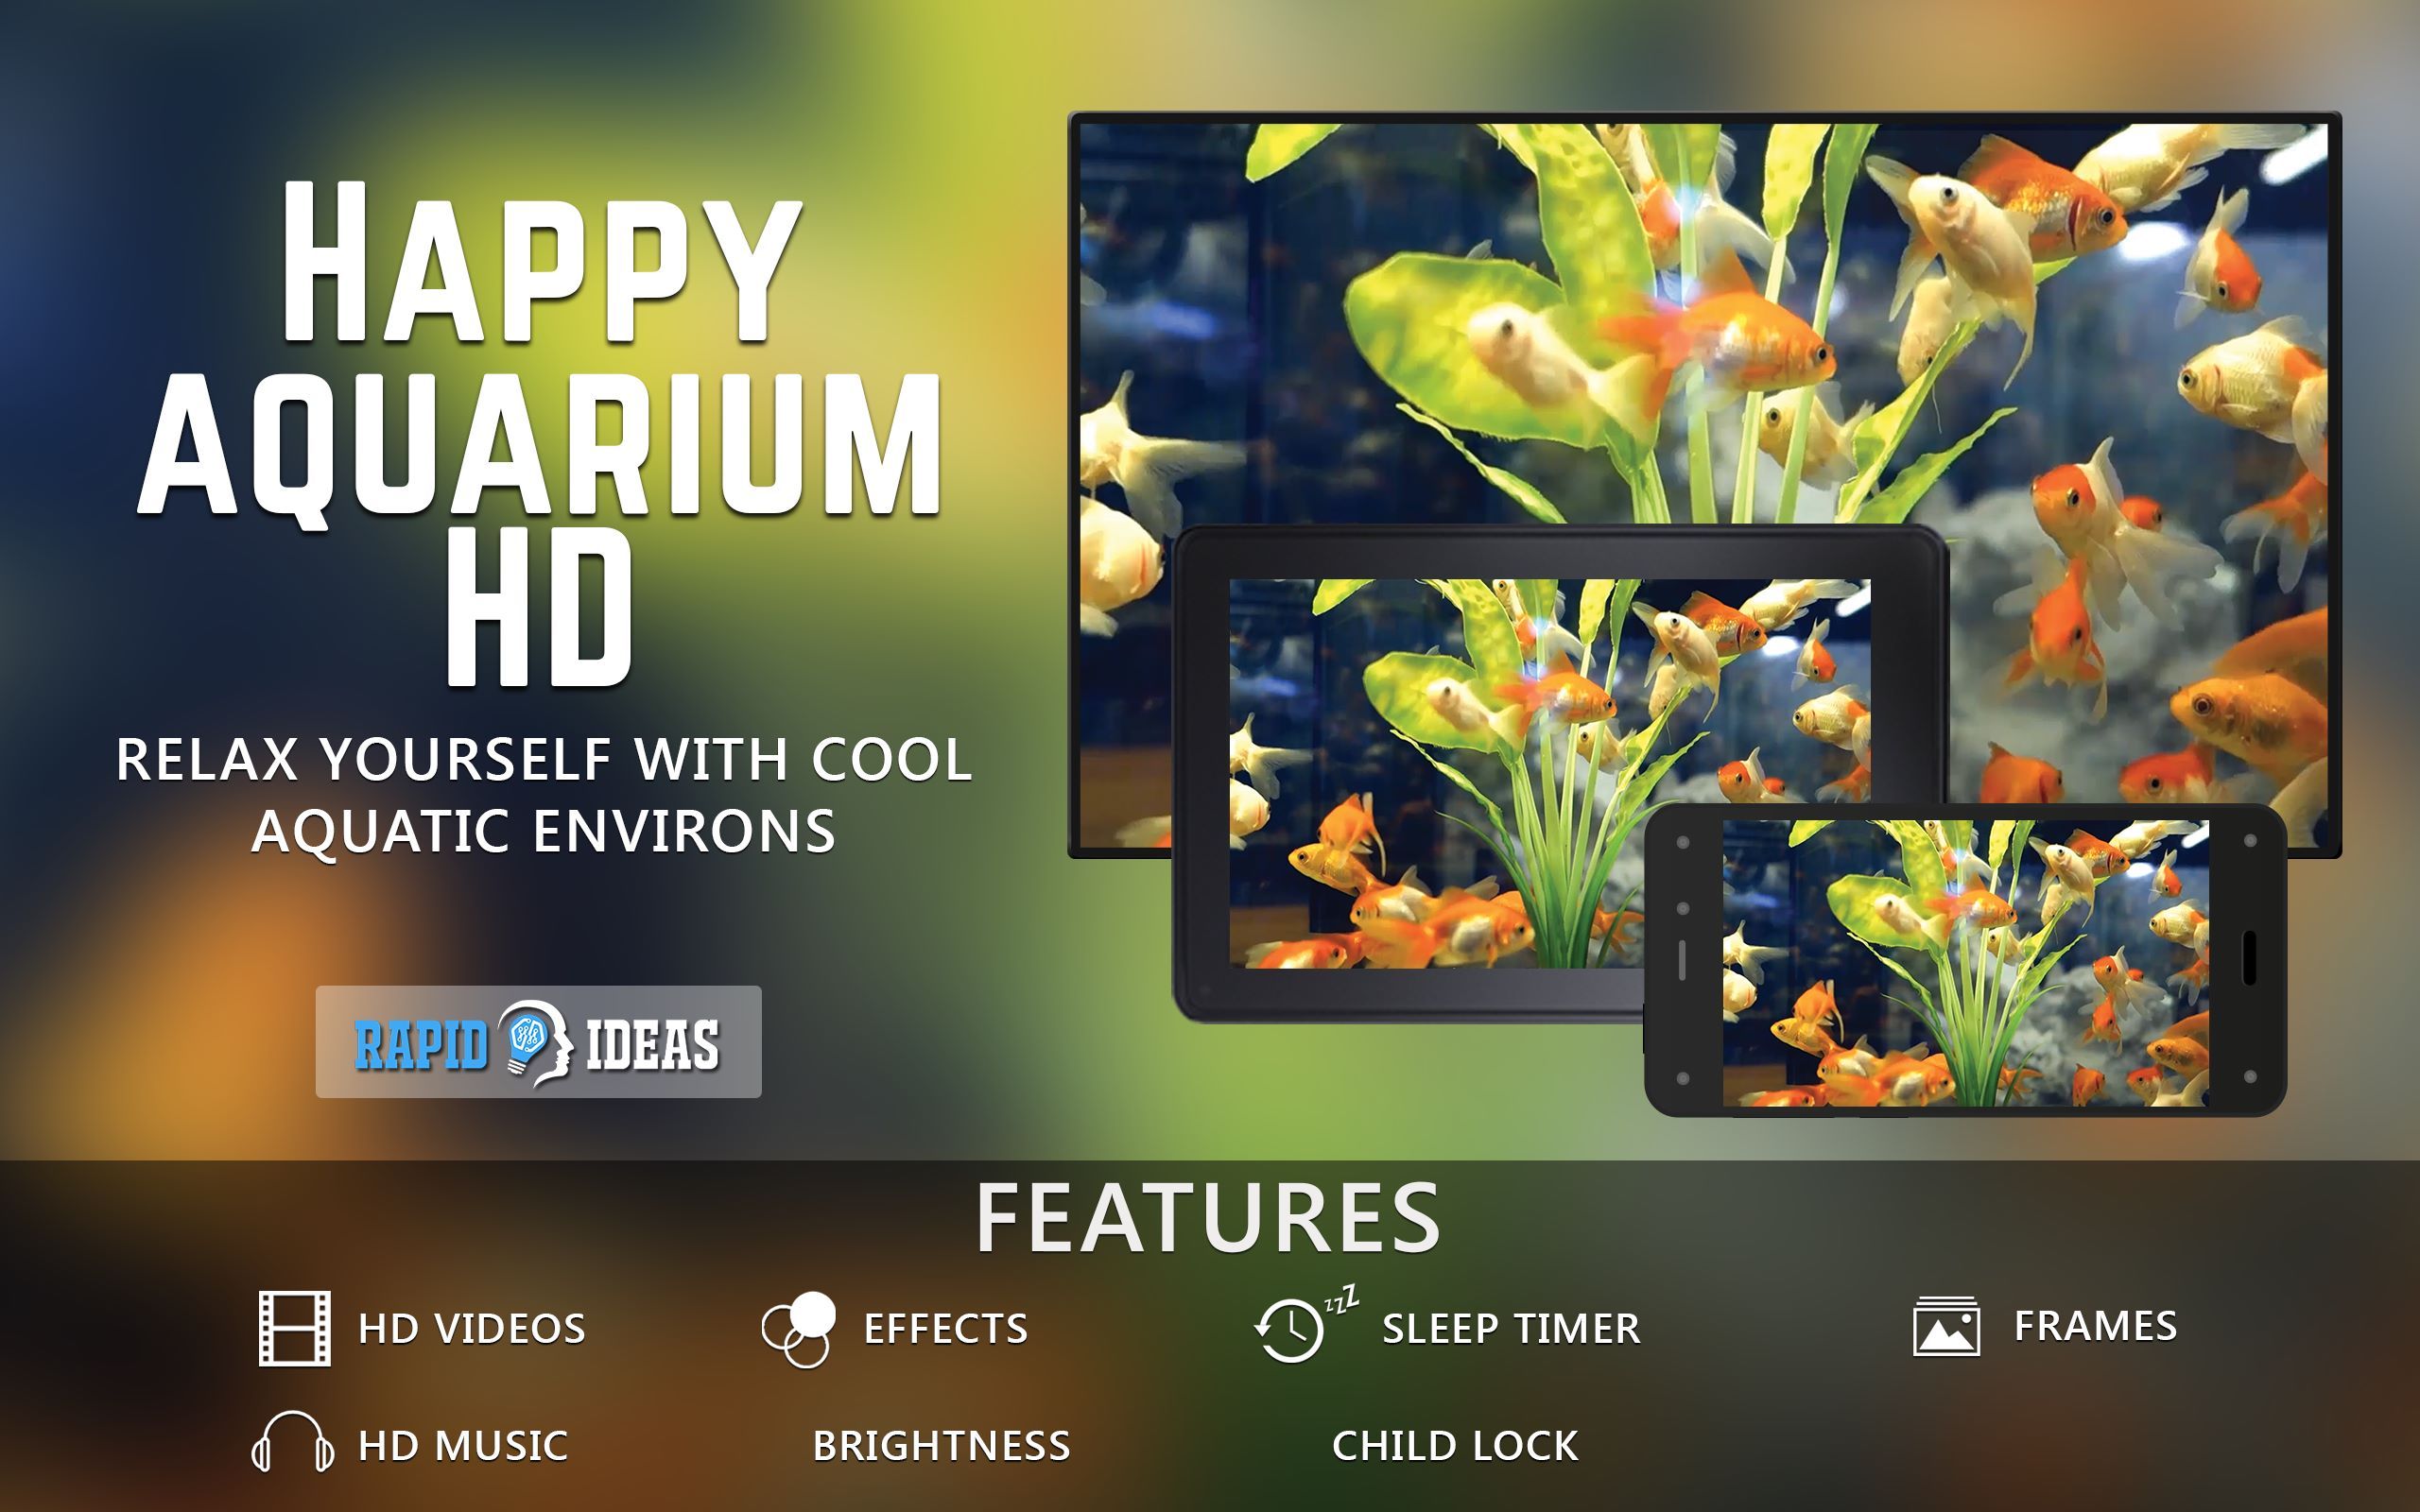 FREE Happy Aquarium HD - Decorate your room with beautiful sea life aquarium on your HDR 4K TV, 8K TV and Fire Devices as a wallpaper, Decoration for Christmas Holidays, Theme for Mediation & Peace